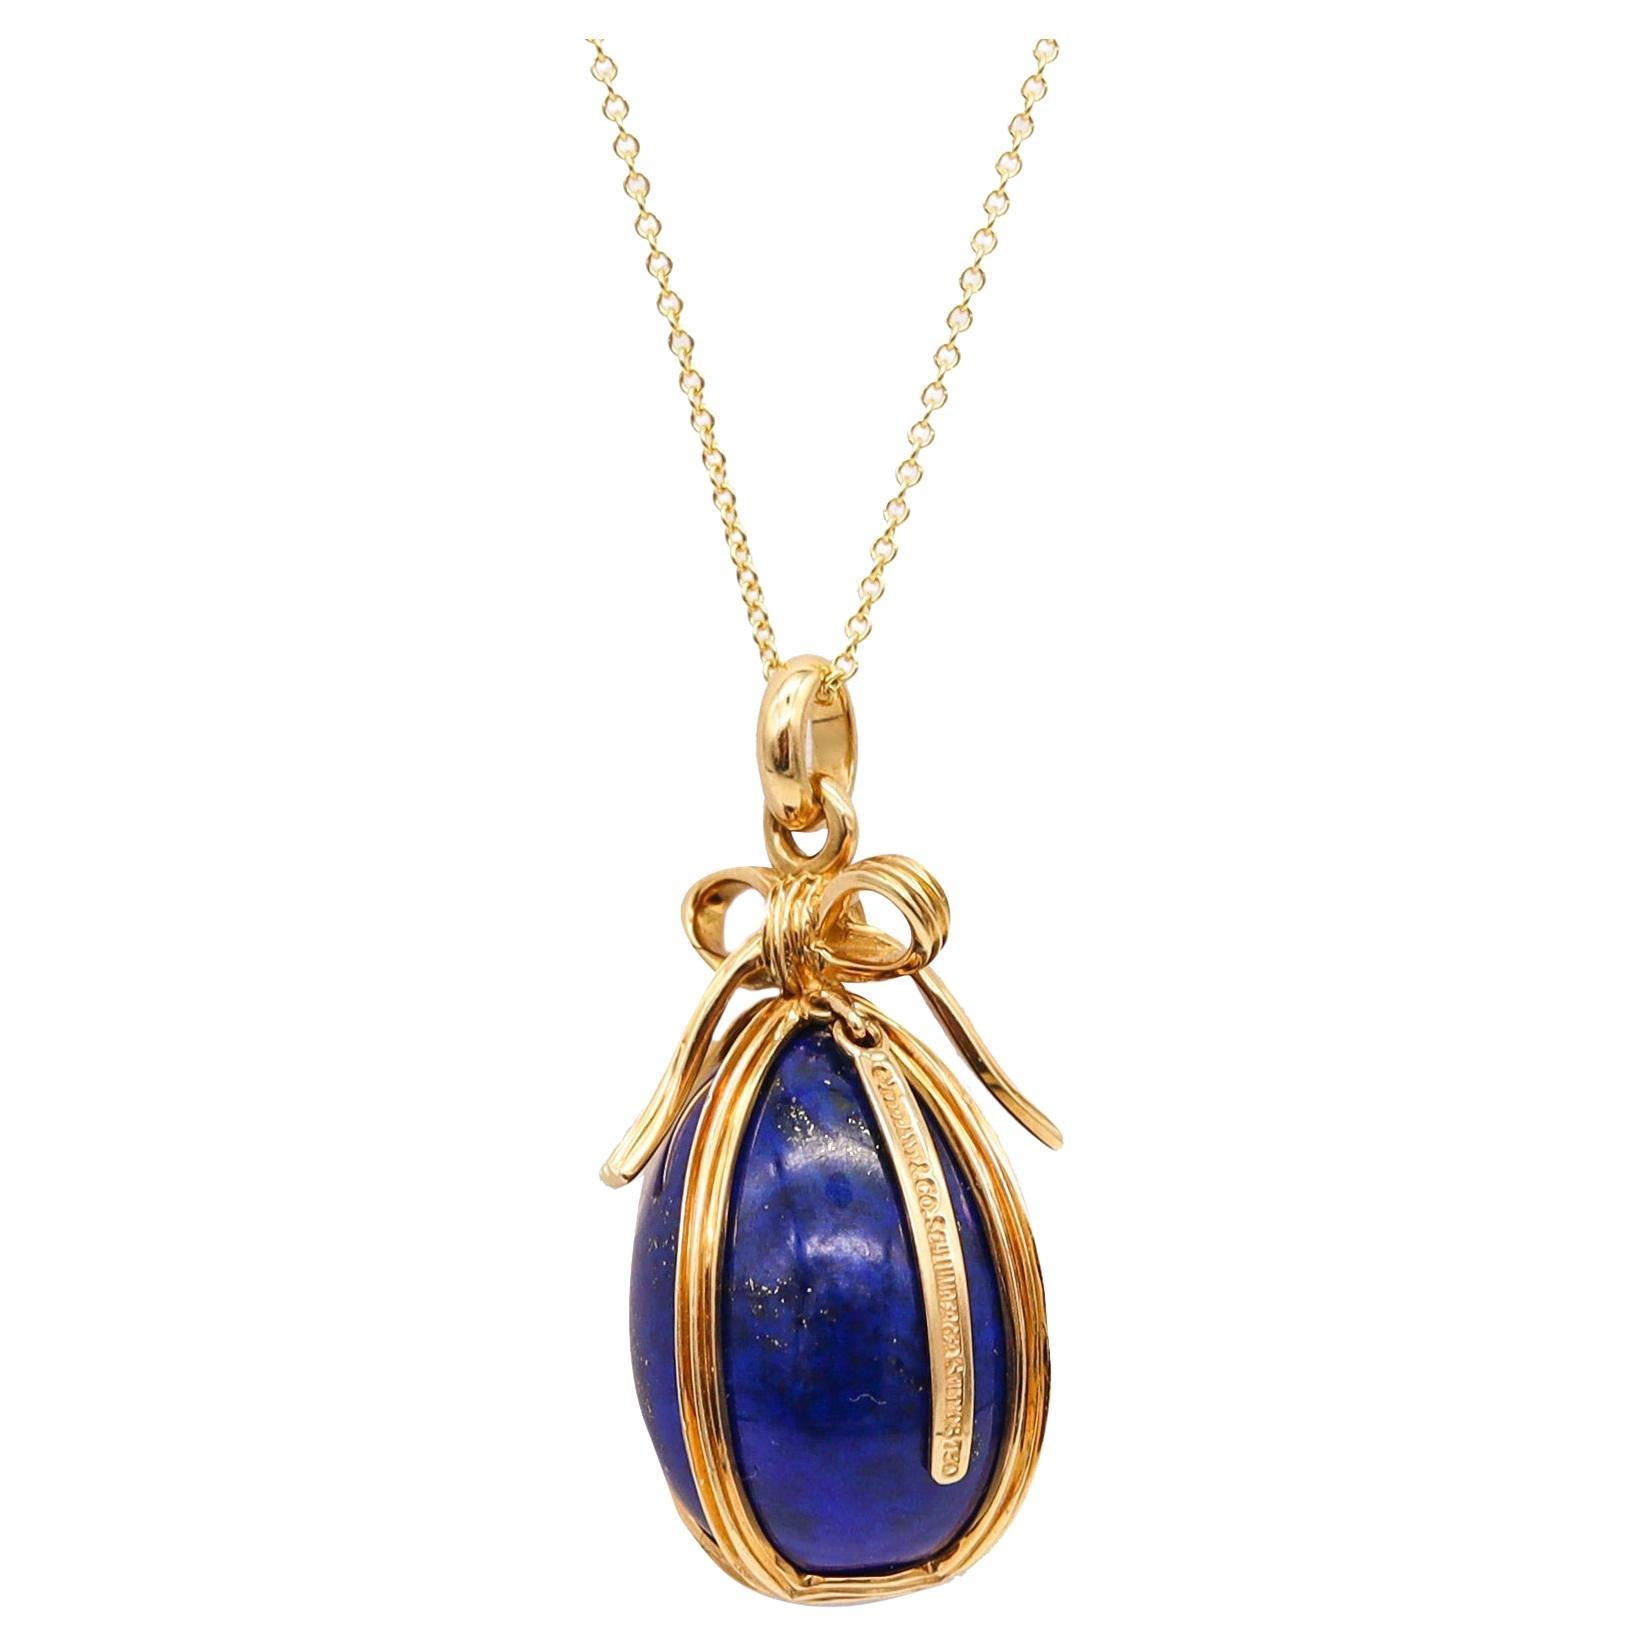 Tiffany Co. 1976 Schlumberger Egg Necklace Chain in 18kt Gold with Lapis Lazuli